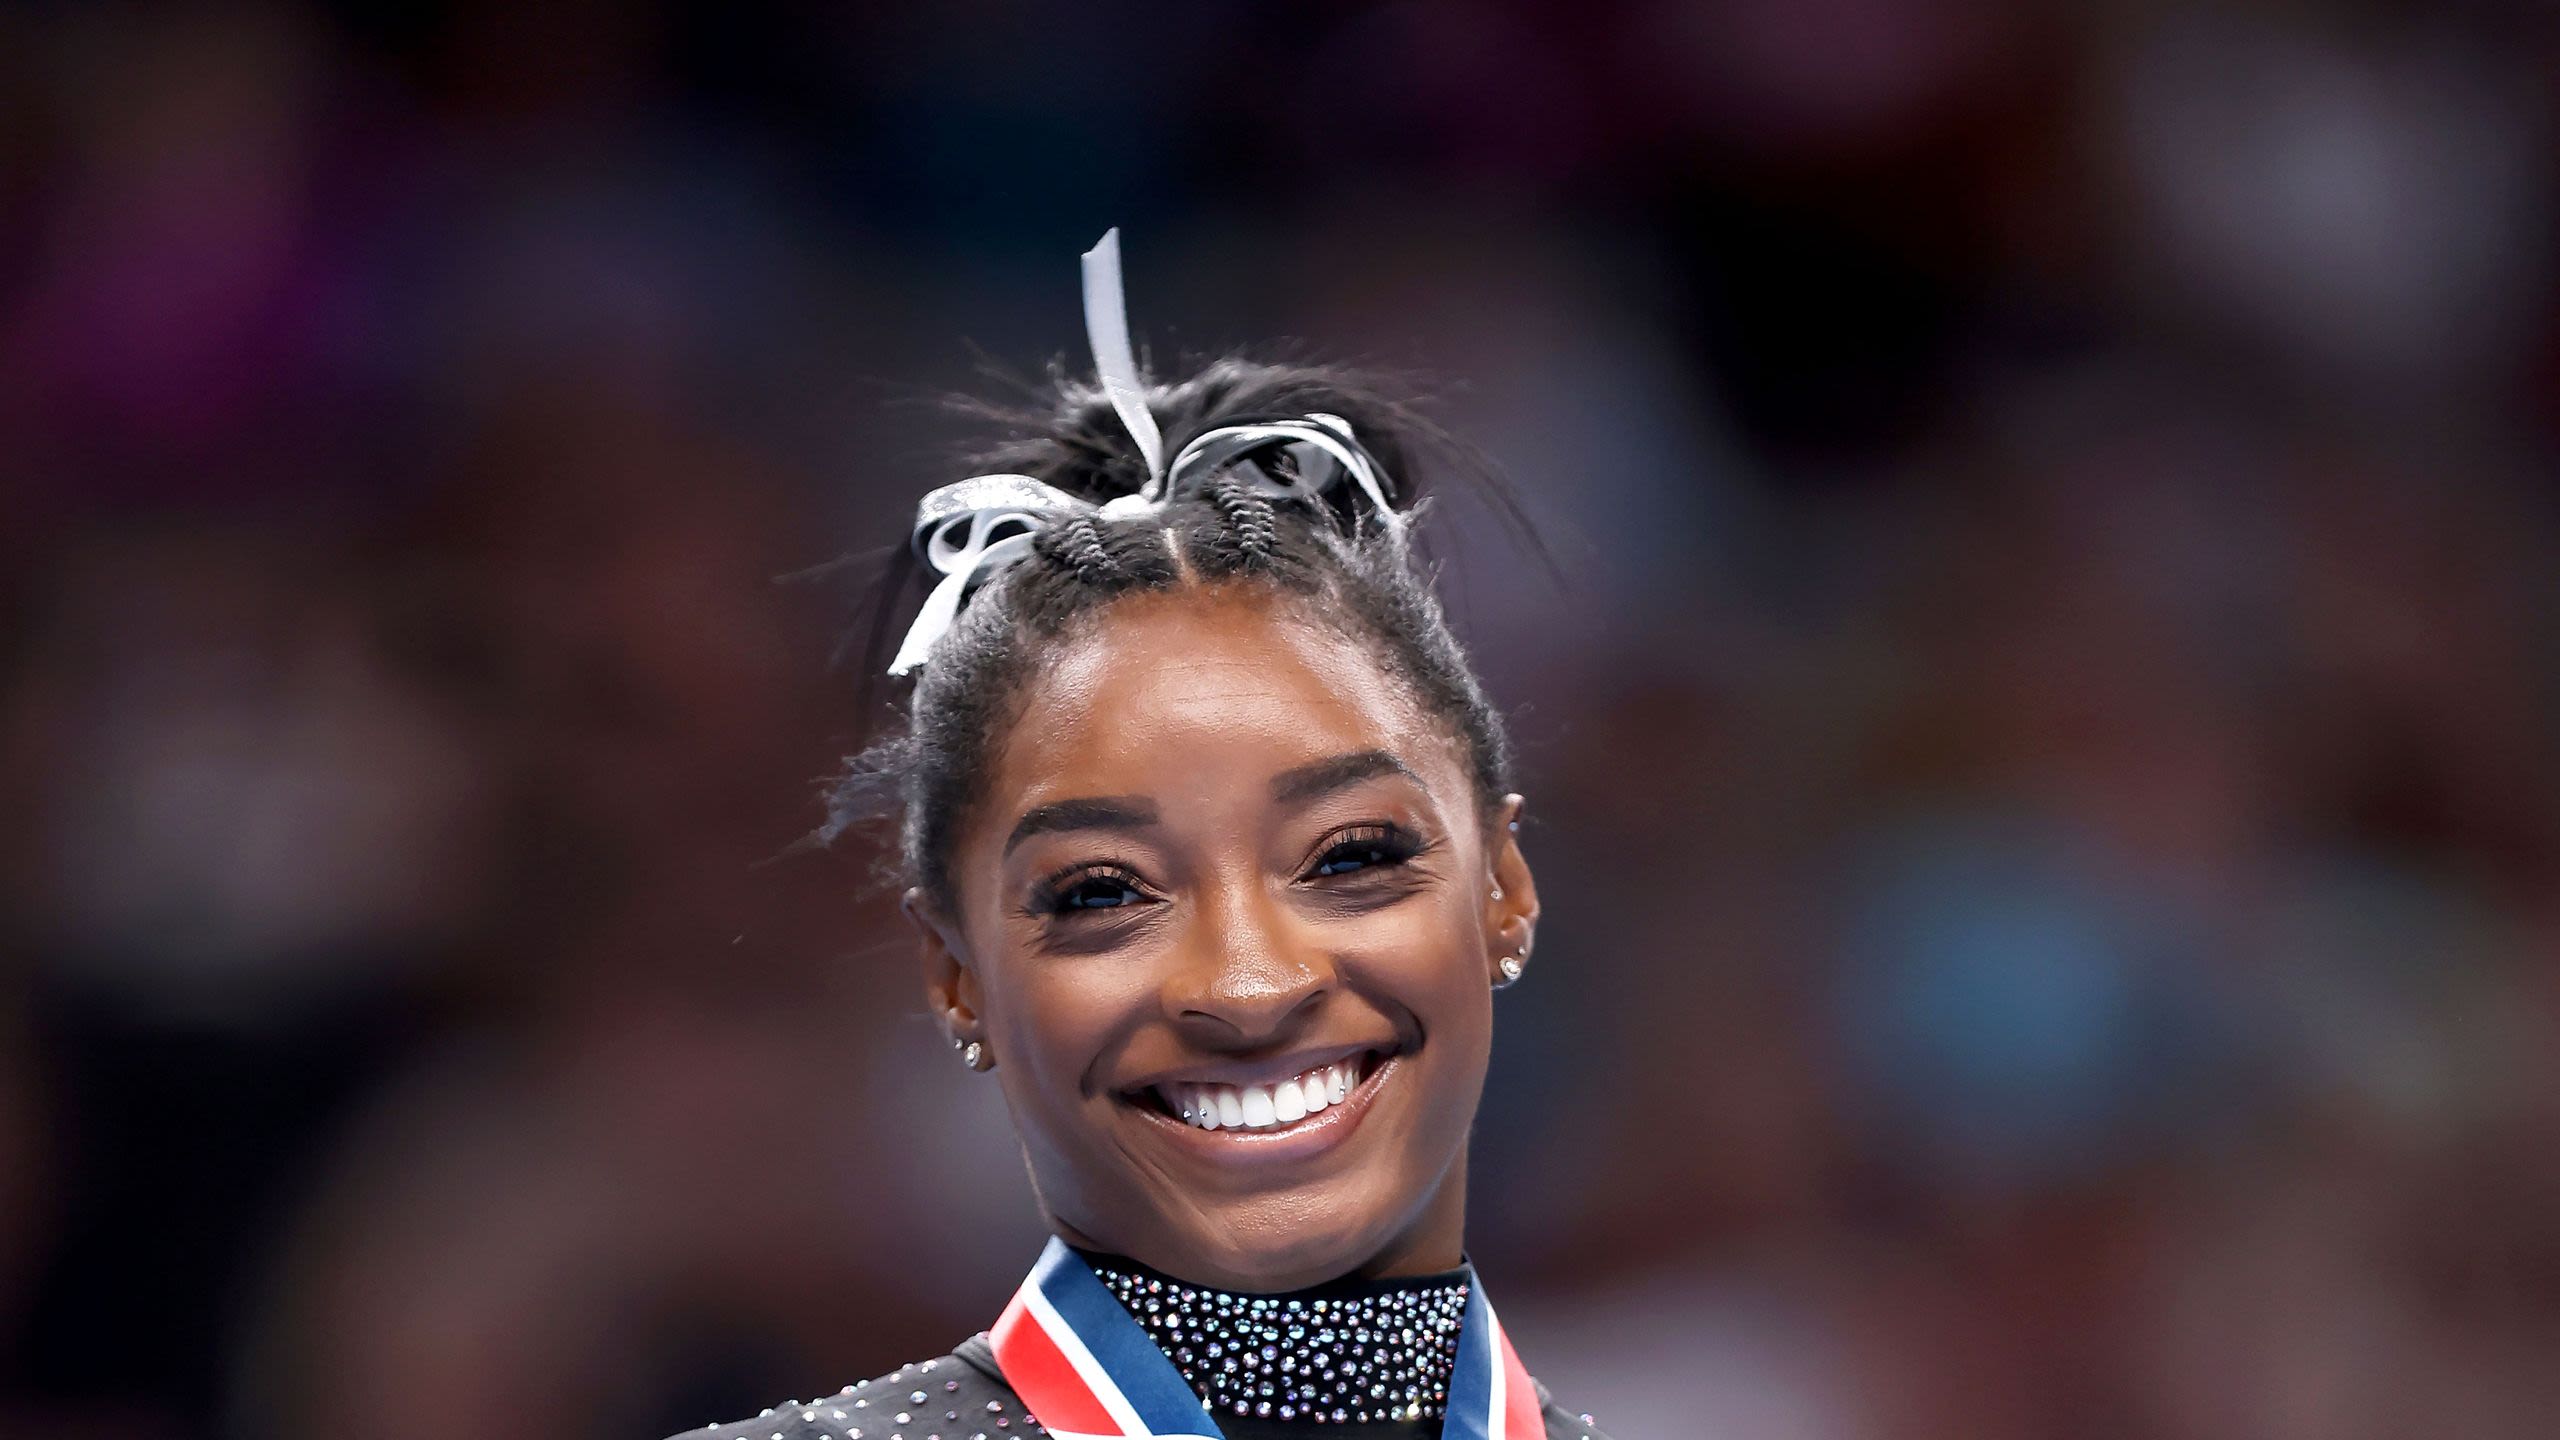 Simone Biles on Marriage, a New Olympic Mindset, and Learning to Love Her Hair